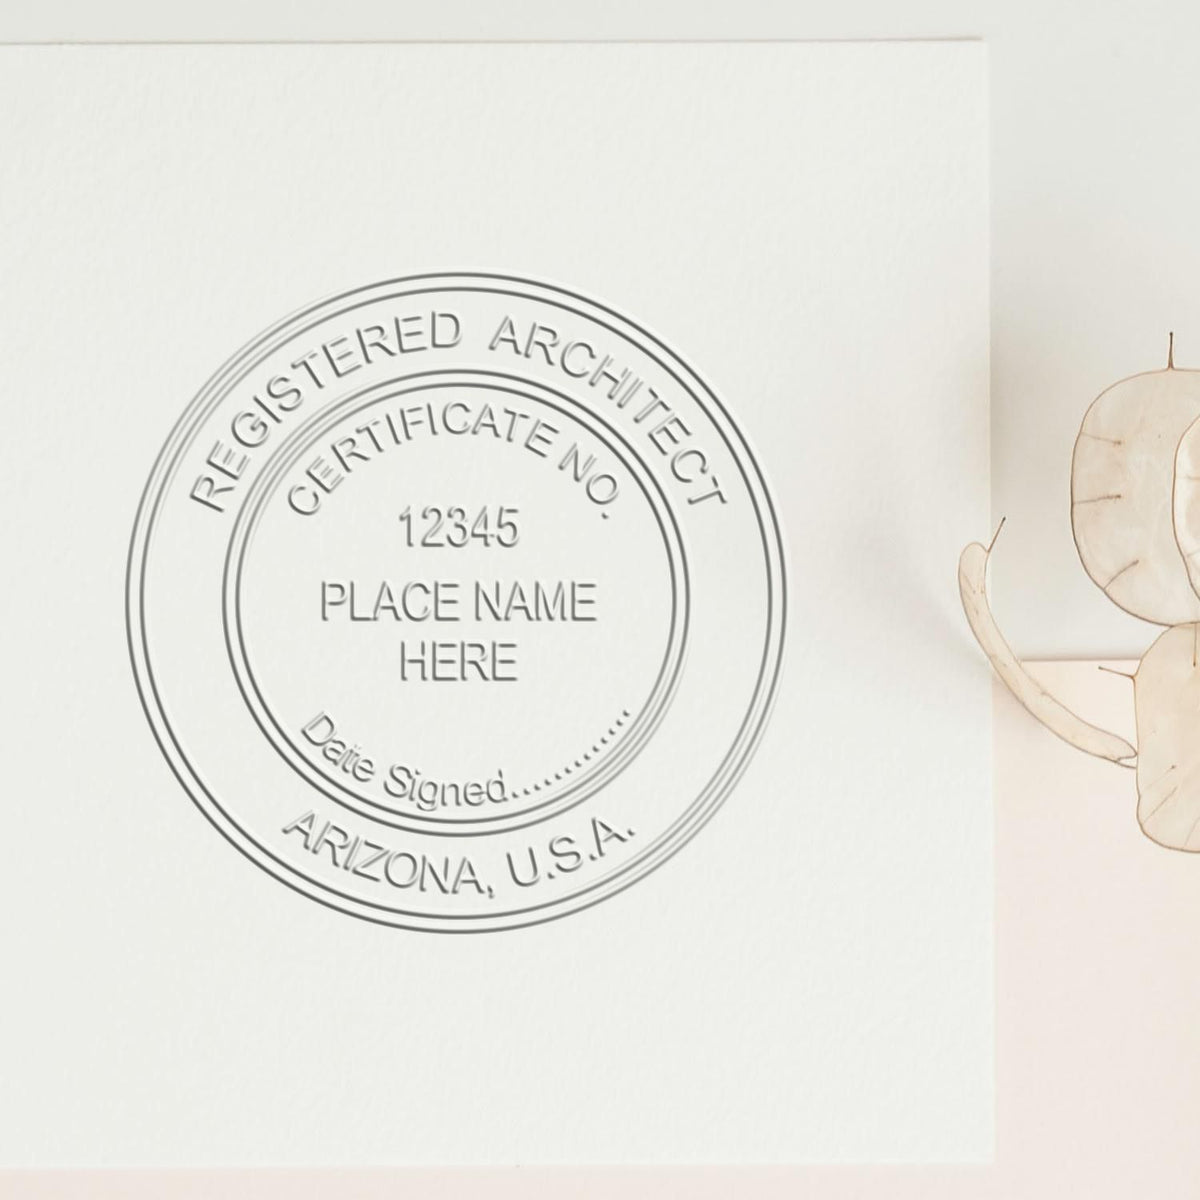 The Gift Arizona Architect Seal stamp impression comes to life with a crisp, detailed image stamped on paper - showcasing true professional quality.